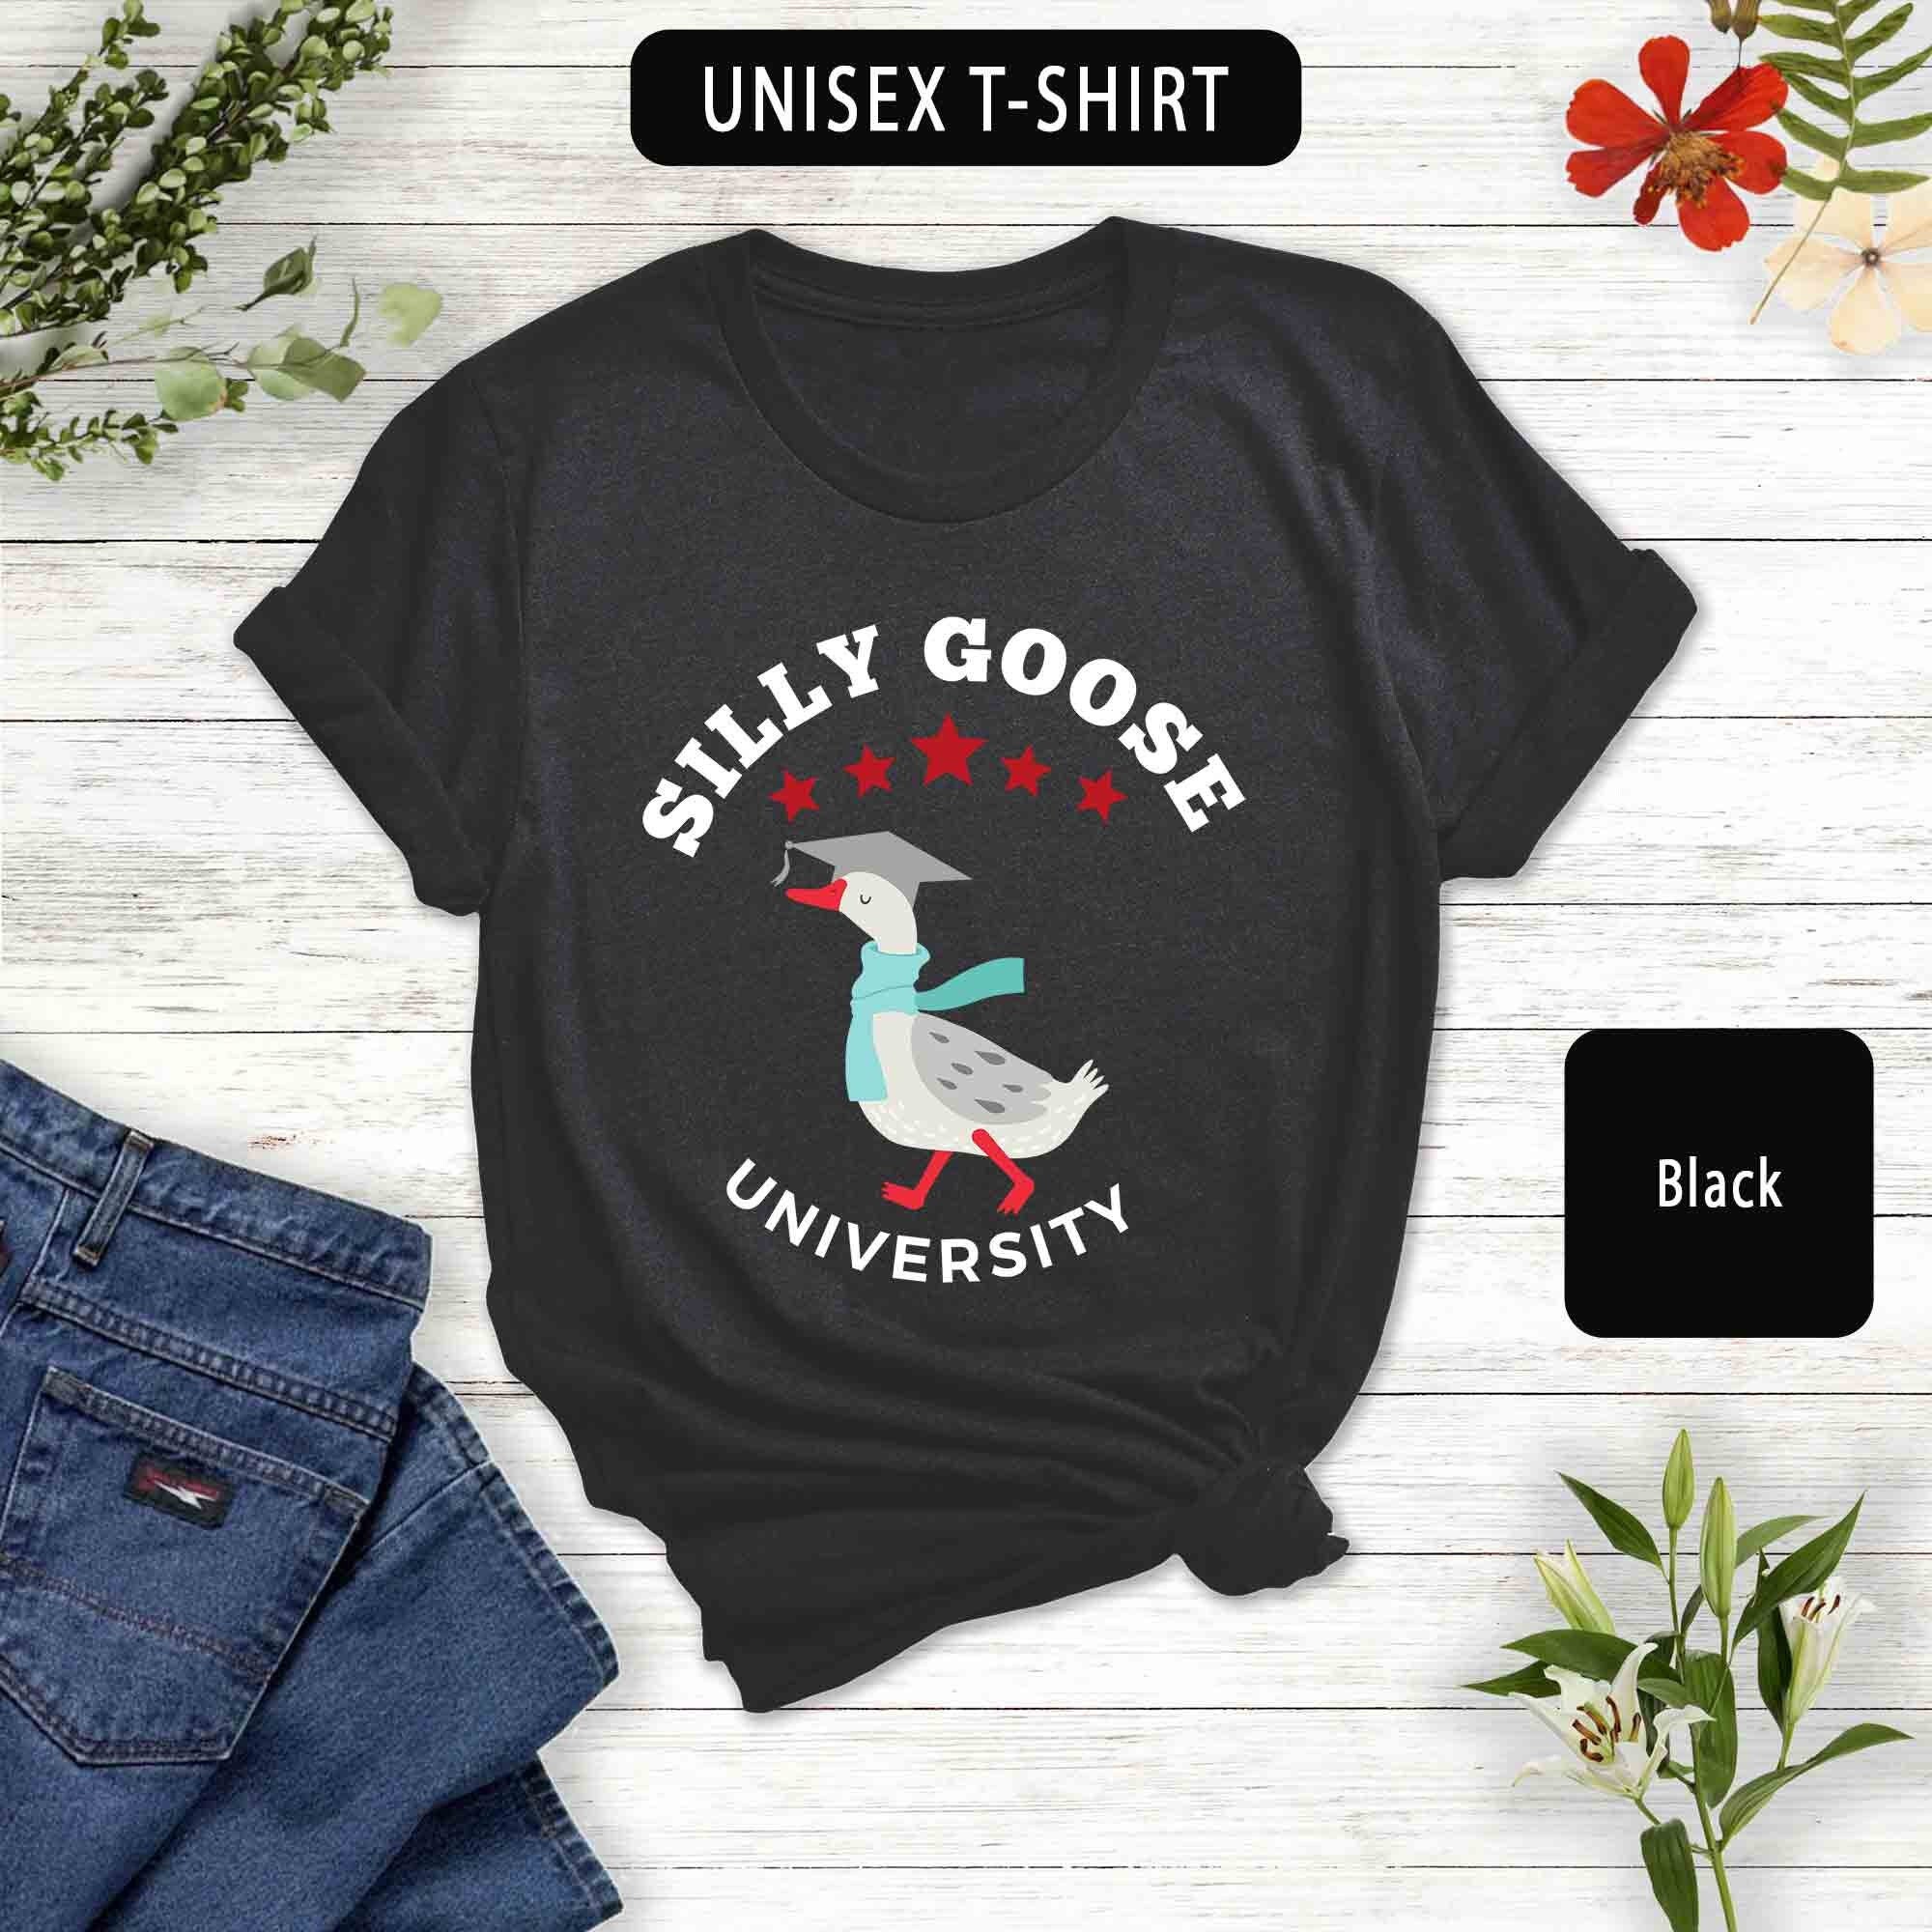 Discover Silly Goose University T-Shirt, Silly Goose University Shirt